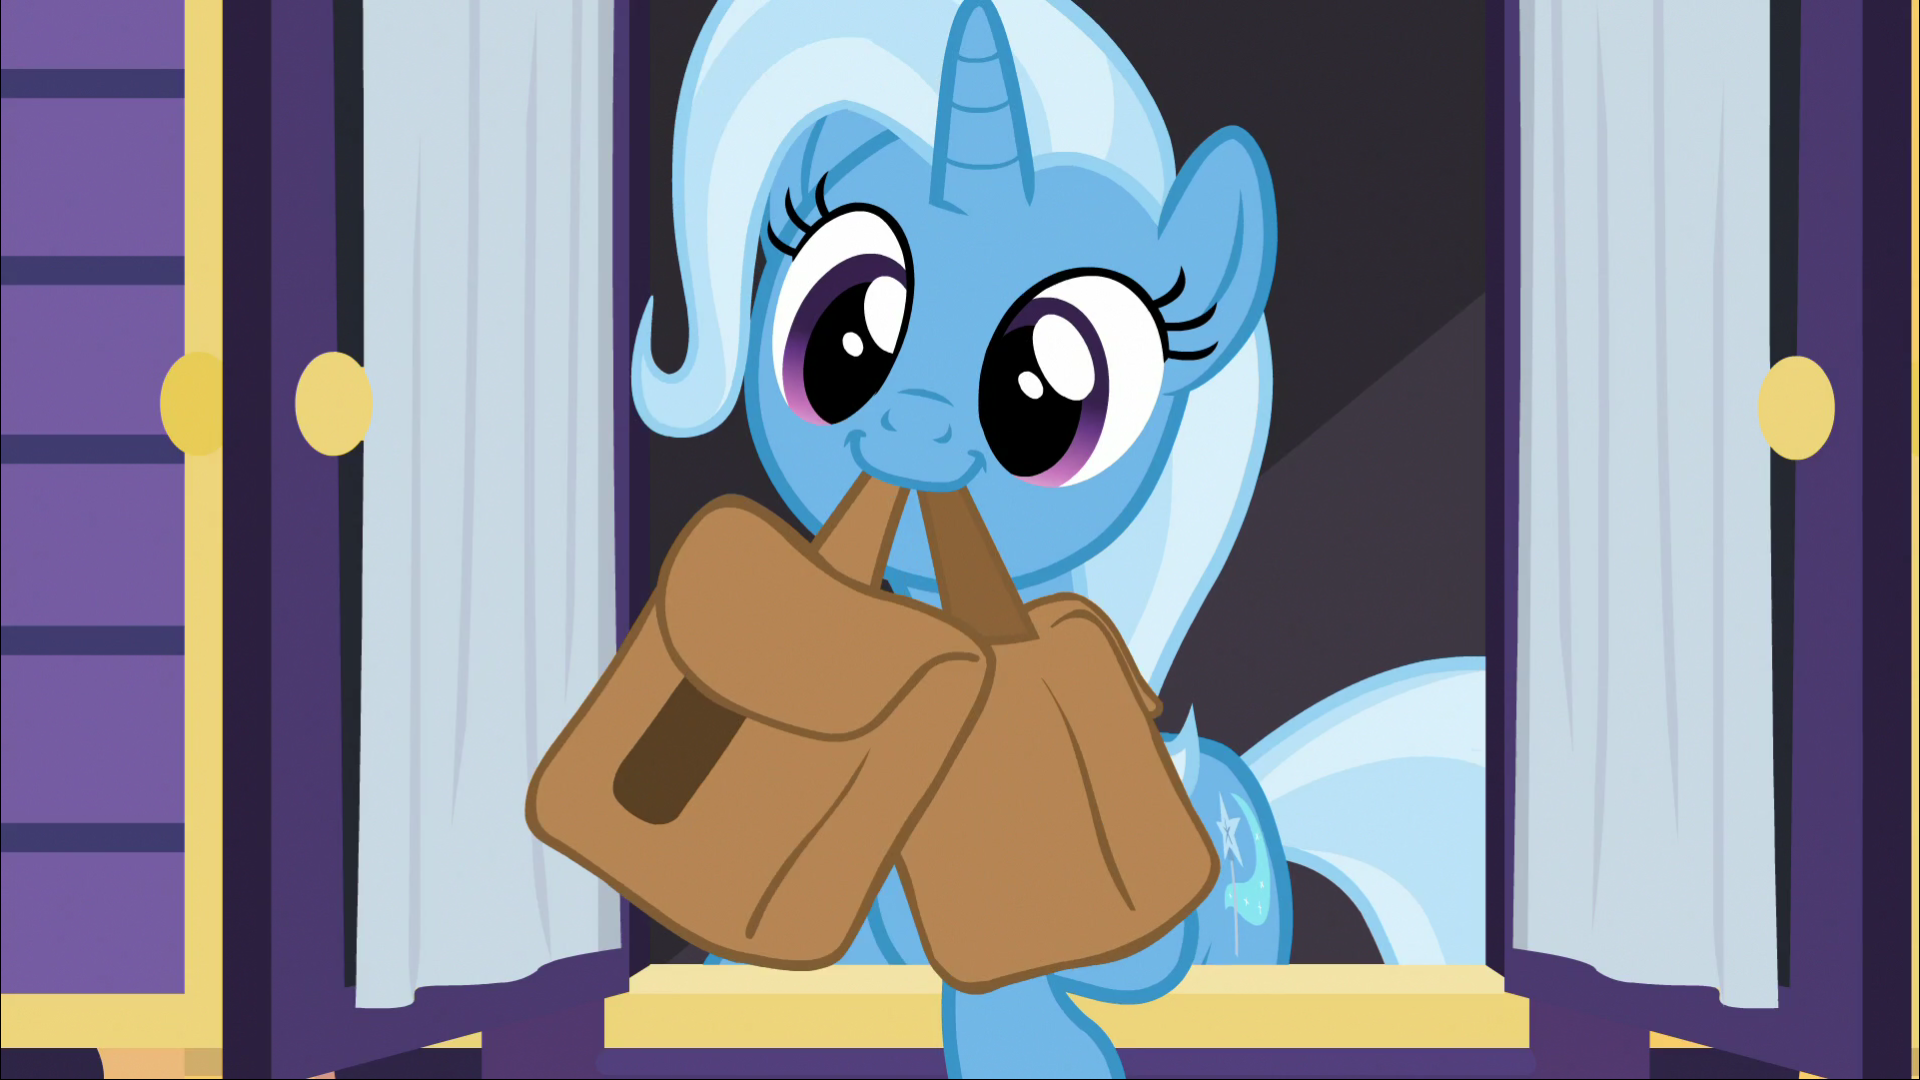 https://derpicdn.net/img/view/2016/10/25/1280978__safe_screencap_trixie_to+where+and+back+again_bag_curtains_cute_diatrixes_mouth+hold_nom_pony_saddle+bag_solo_to+saddlebags+and+back+again_tri.png